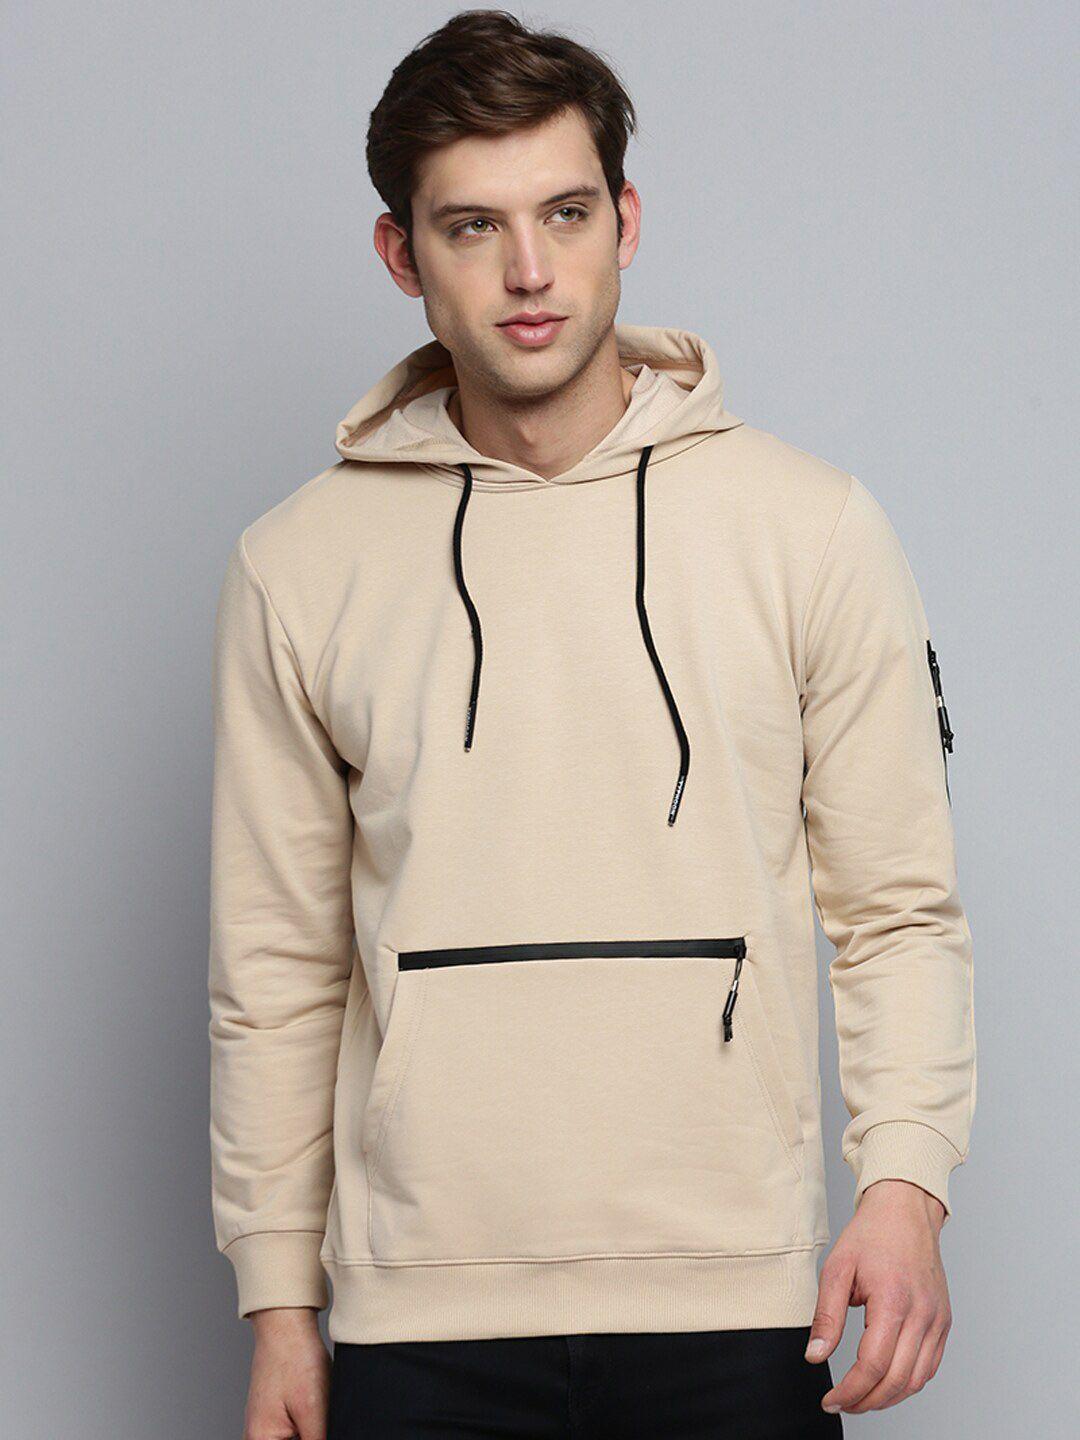 showoff-hooded-pullover-cotton-sweatshirt